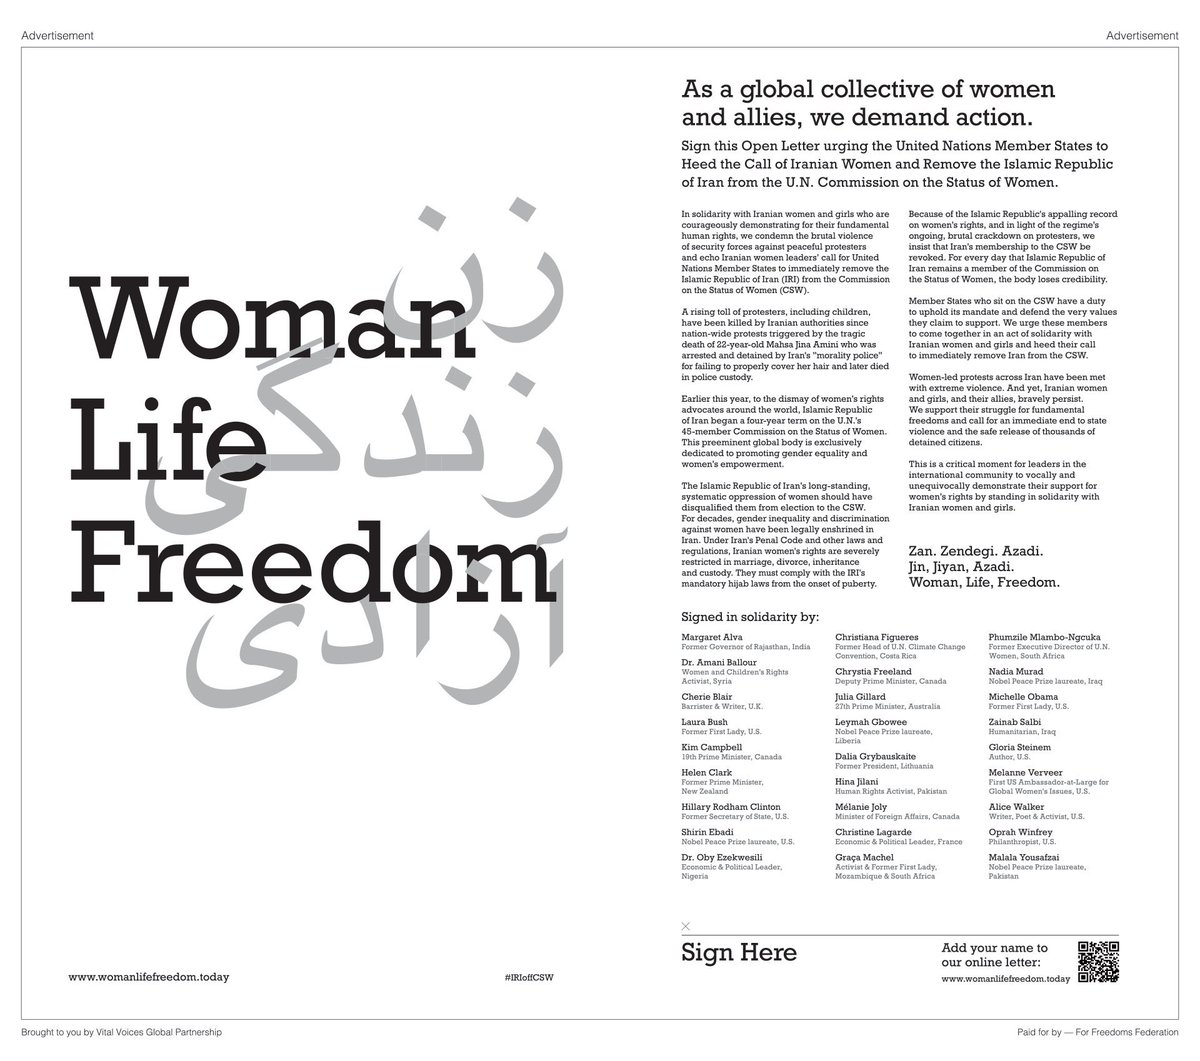 Full page letter in The NY Times, signed by female world leaders, urging action be taken to remove the Islamic Republic from the UN Commission on the Status of Women. Thank you to everyone who has signed & supported. Please sign if you haven’t: womanlifefreedom.today #MahsaAmini